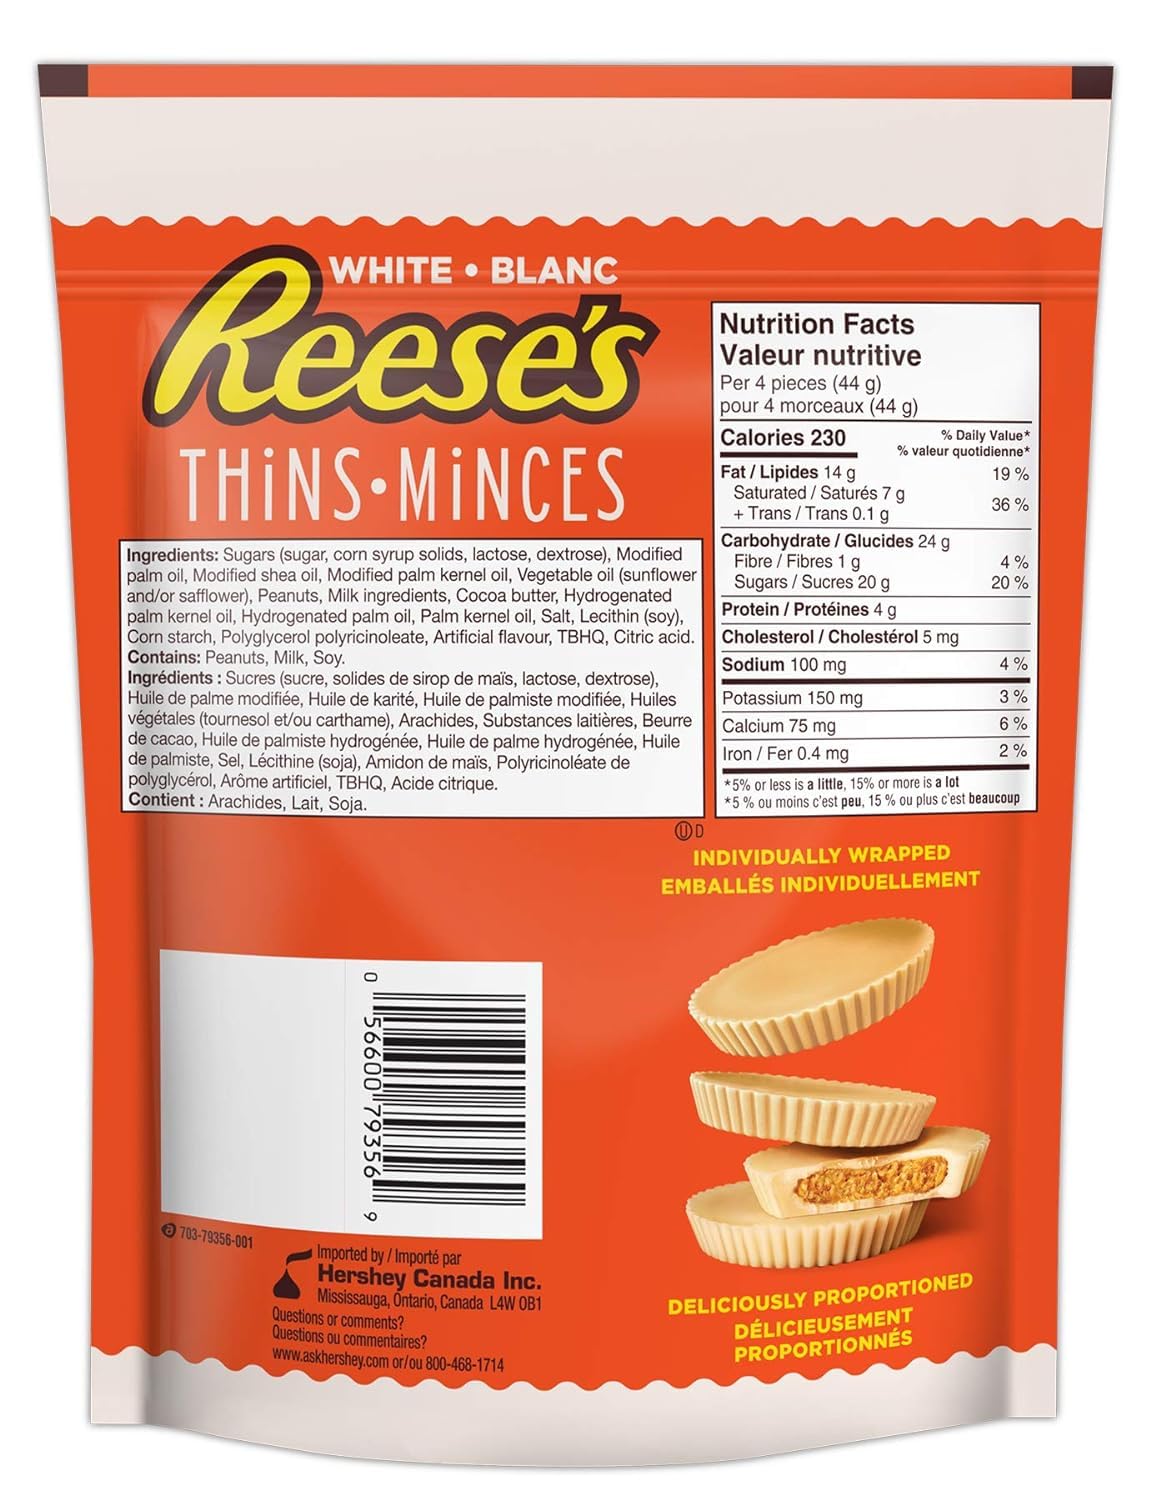 Reese's Thins Peanut Butter Cups White Crème 165g/5.8oz (Shipped from Canada)